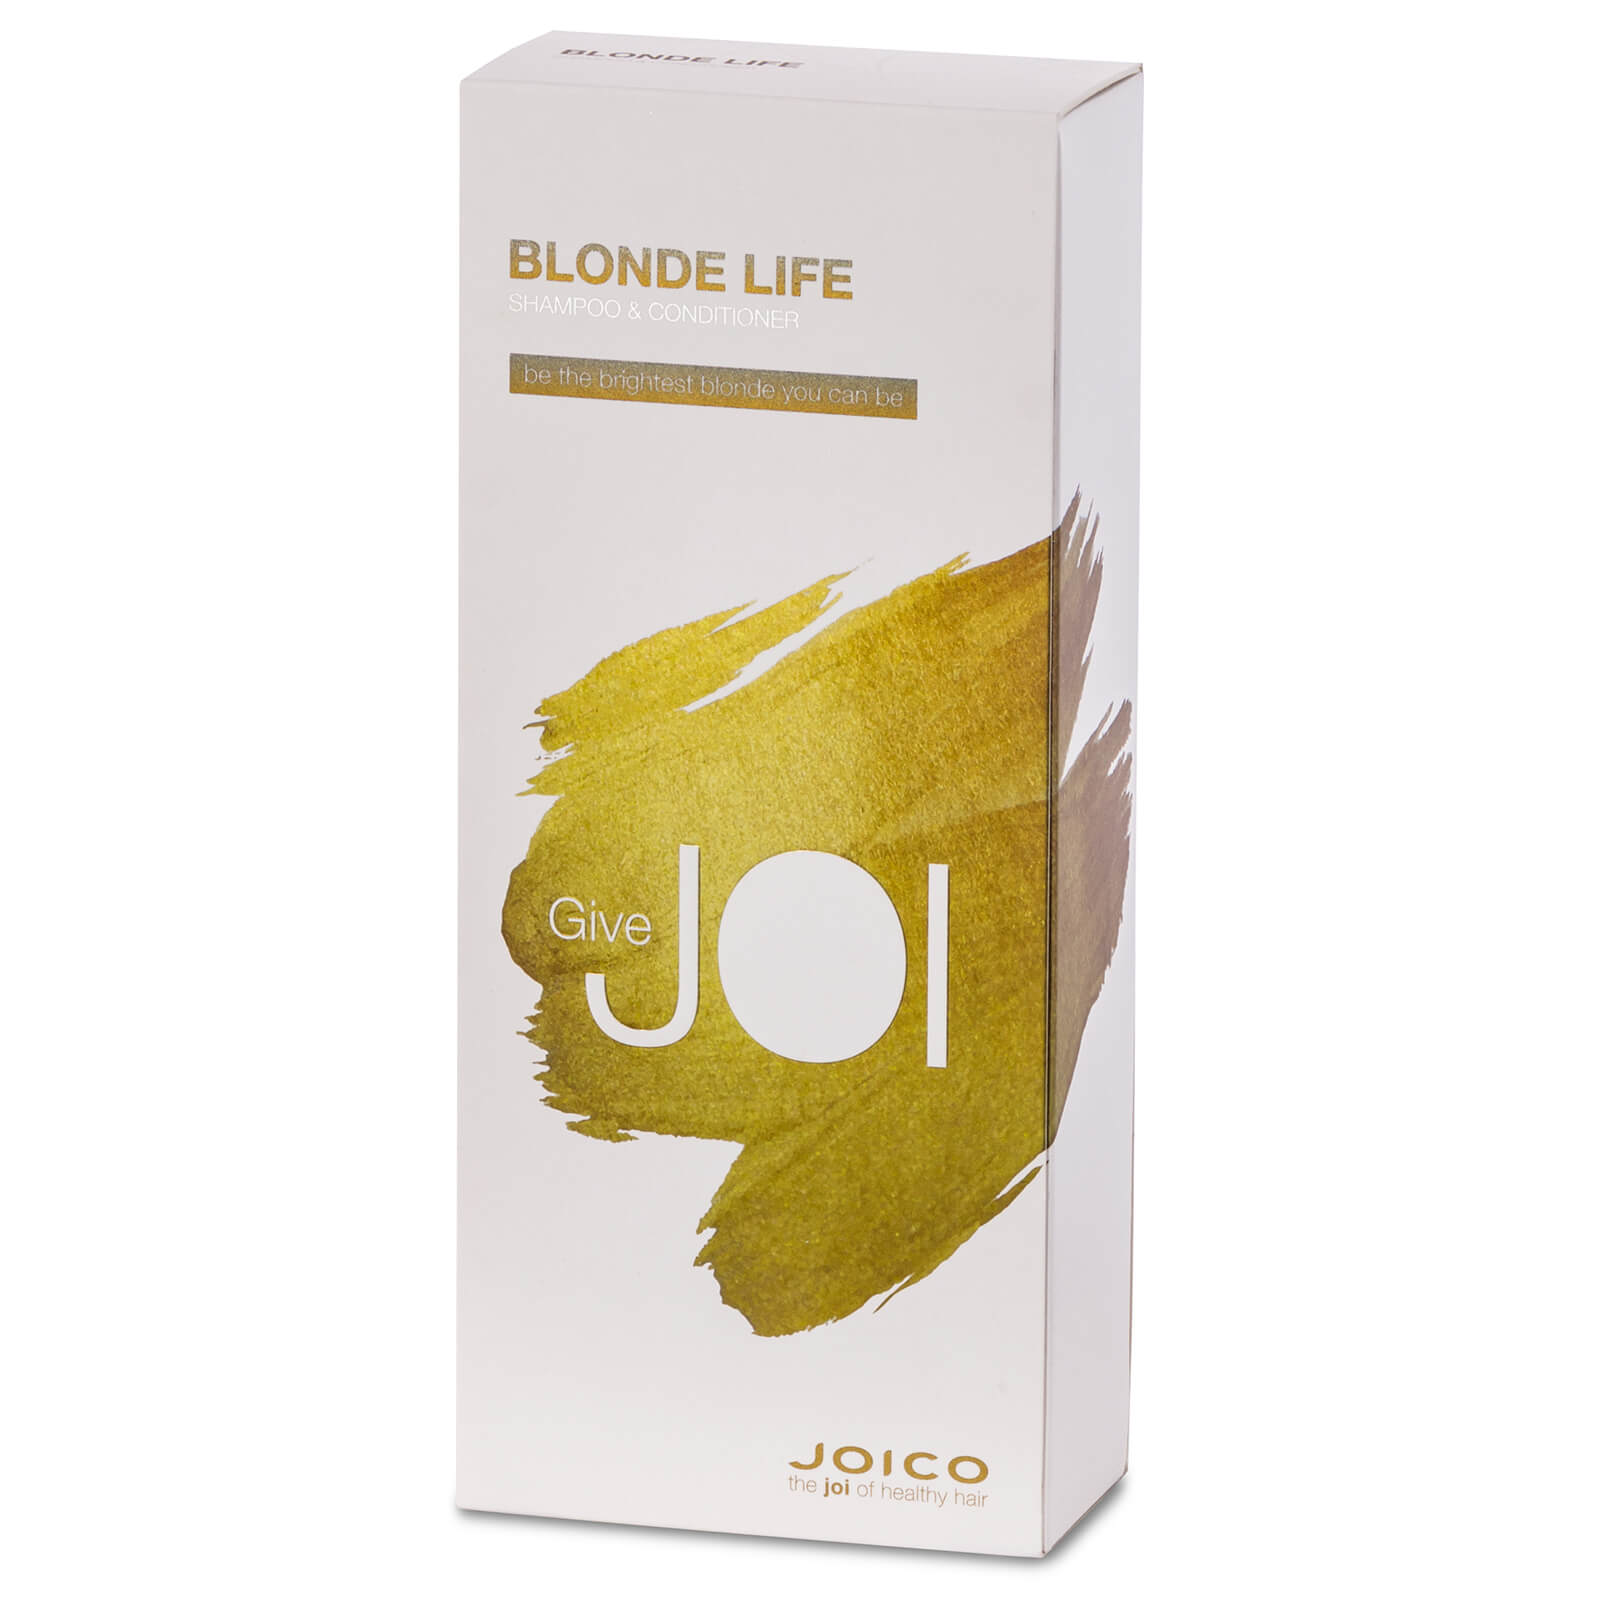 Joico Blonde Life Gift Pack Shampoo 300ml and Conditioner 250ml